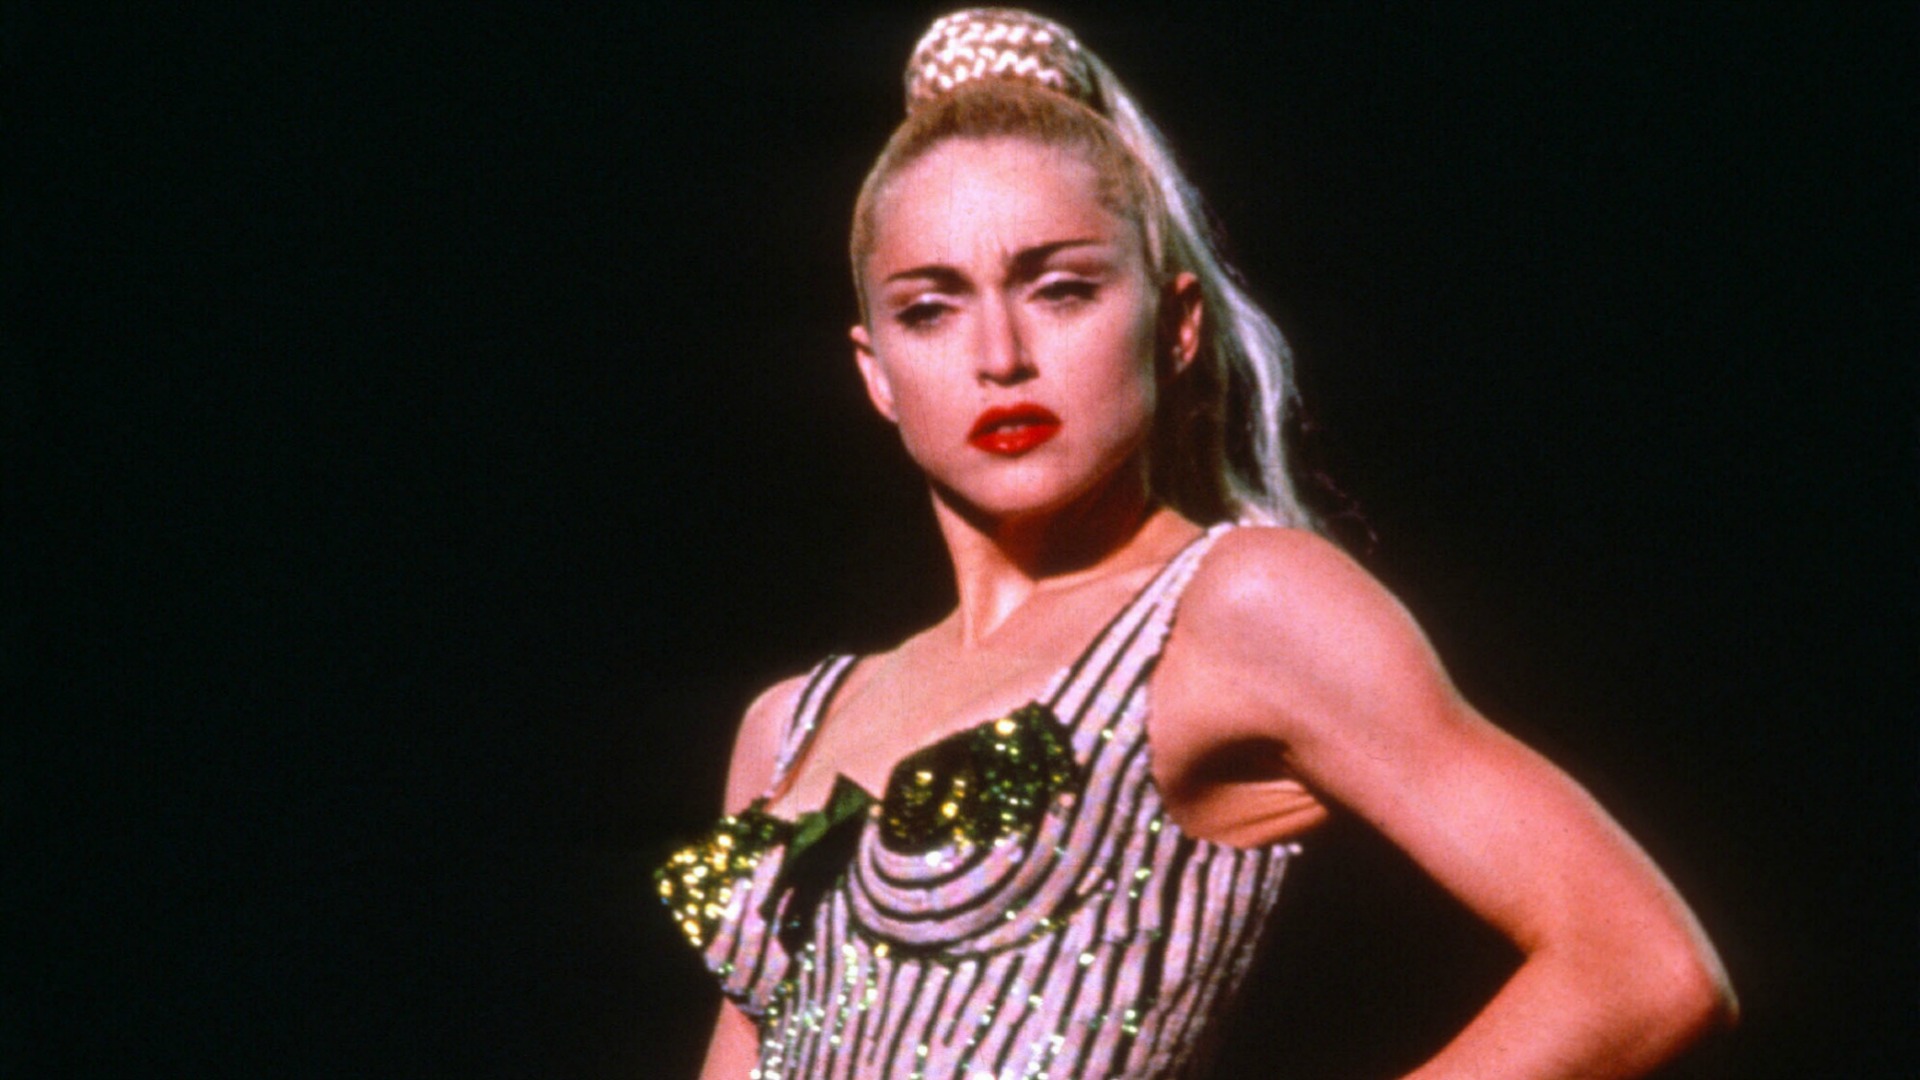 If Madonna's 56-year-old nipples could talk, here's what they'd say